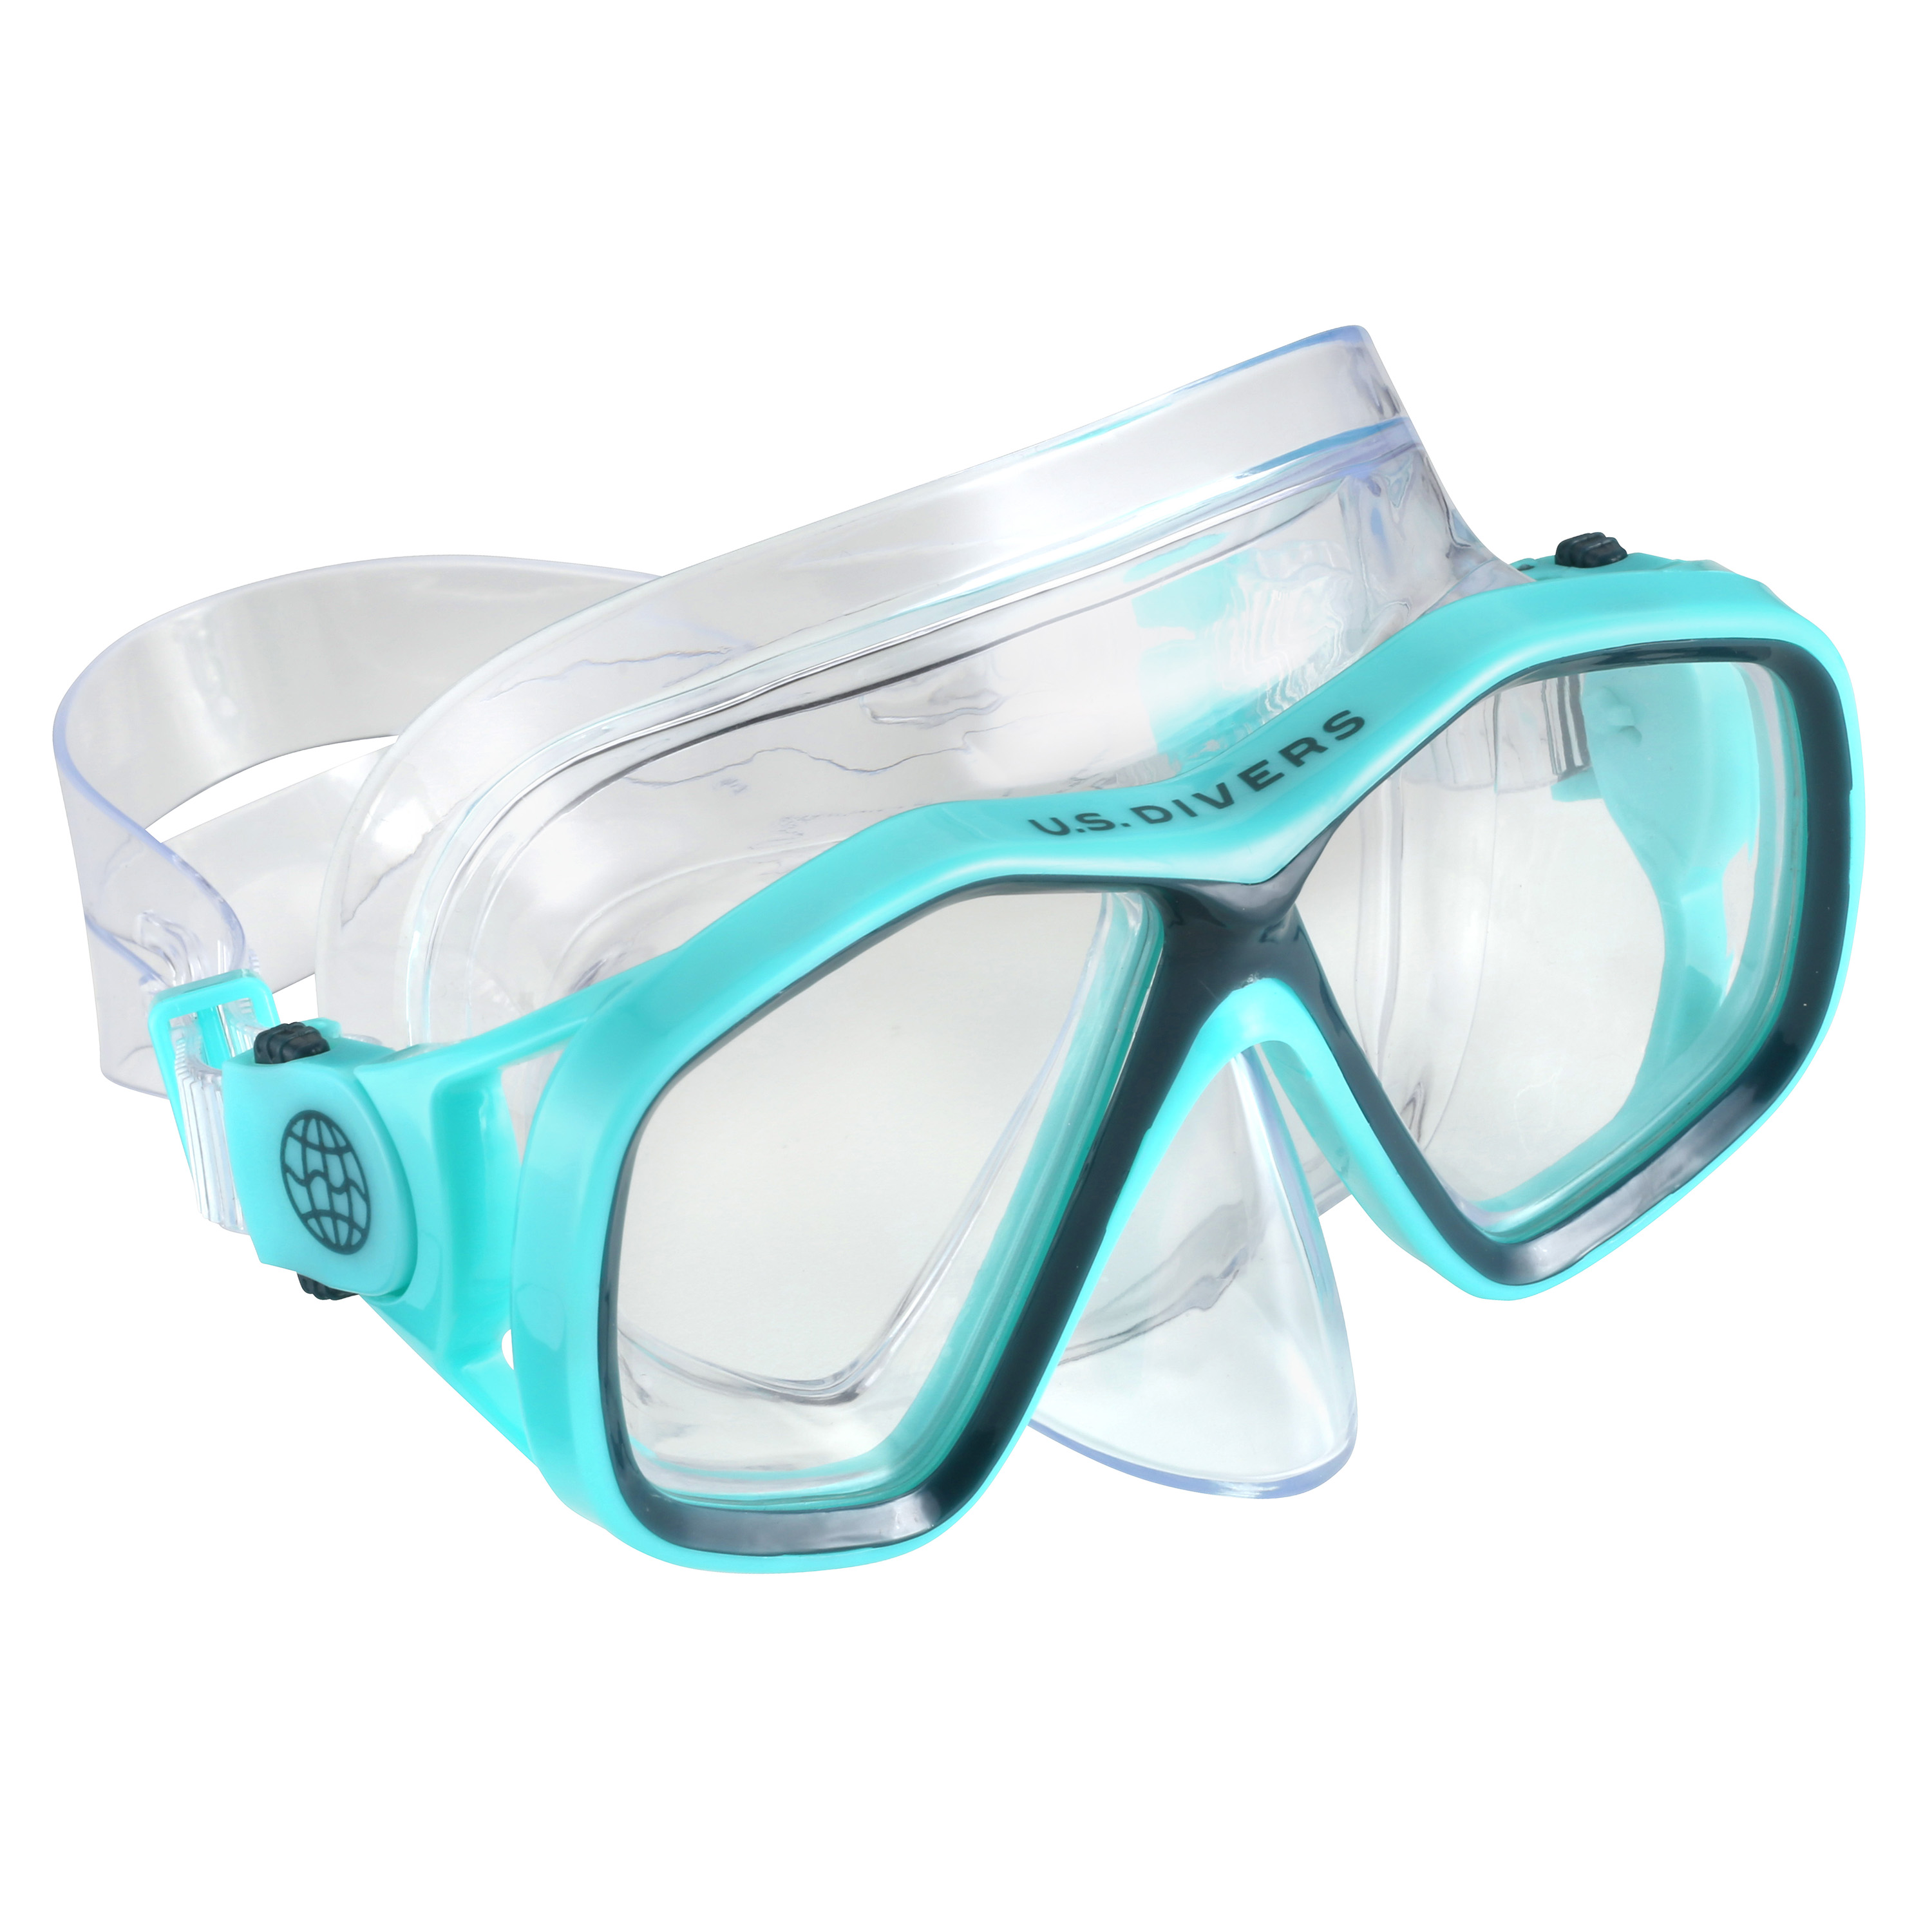 U.S. Divers Playa Adult Snorkeling Combo - Mask and Snorkel Included (Teal & Blue) - image 2 of 10